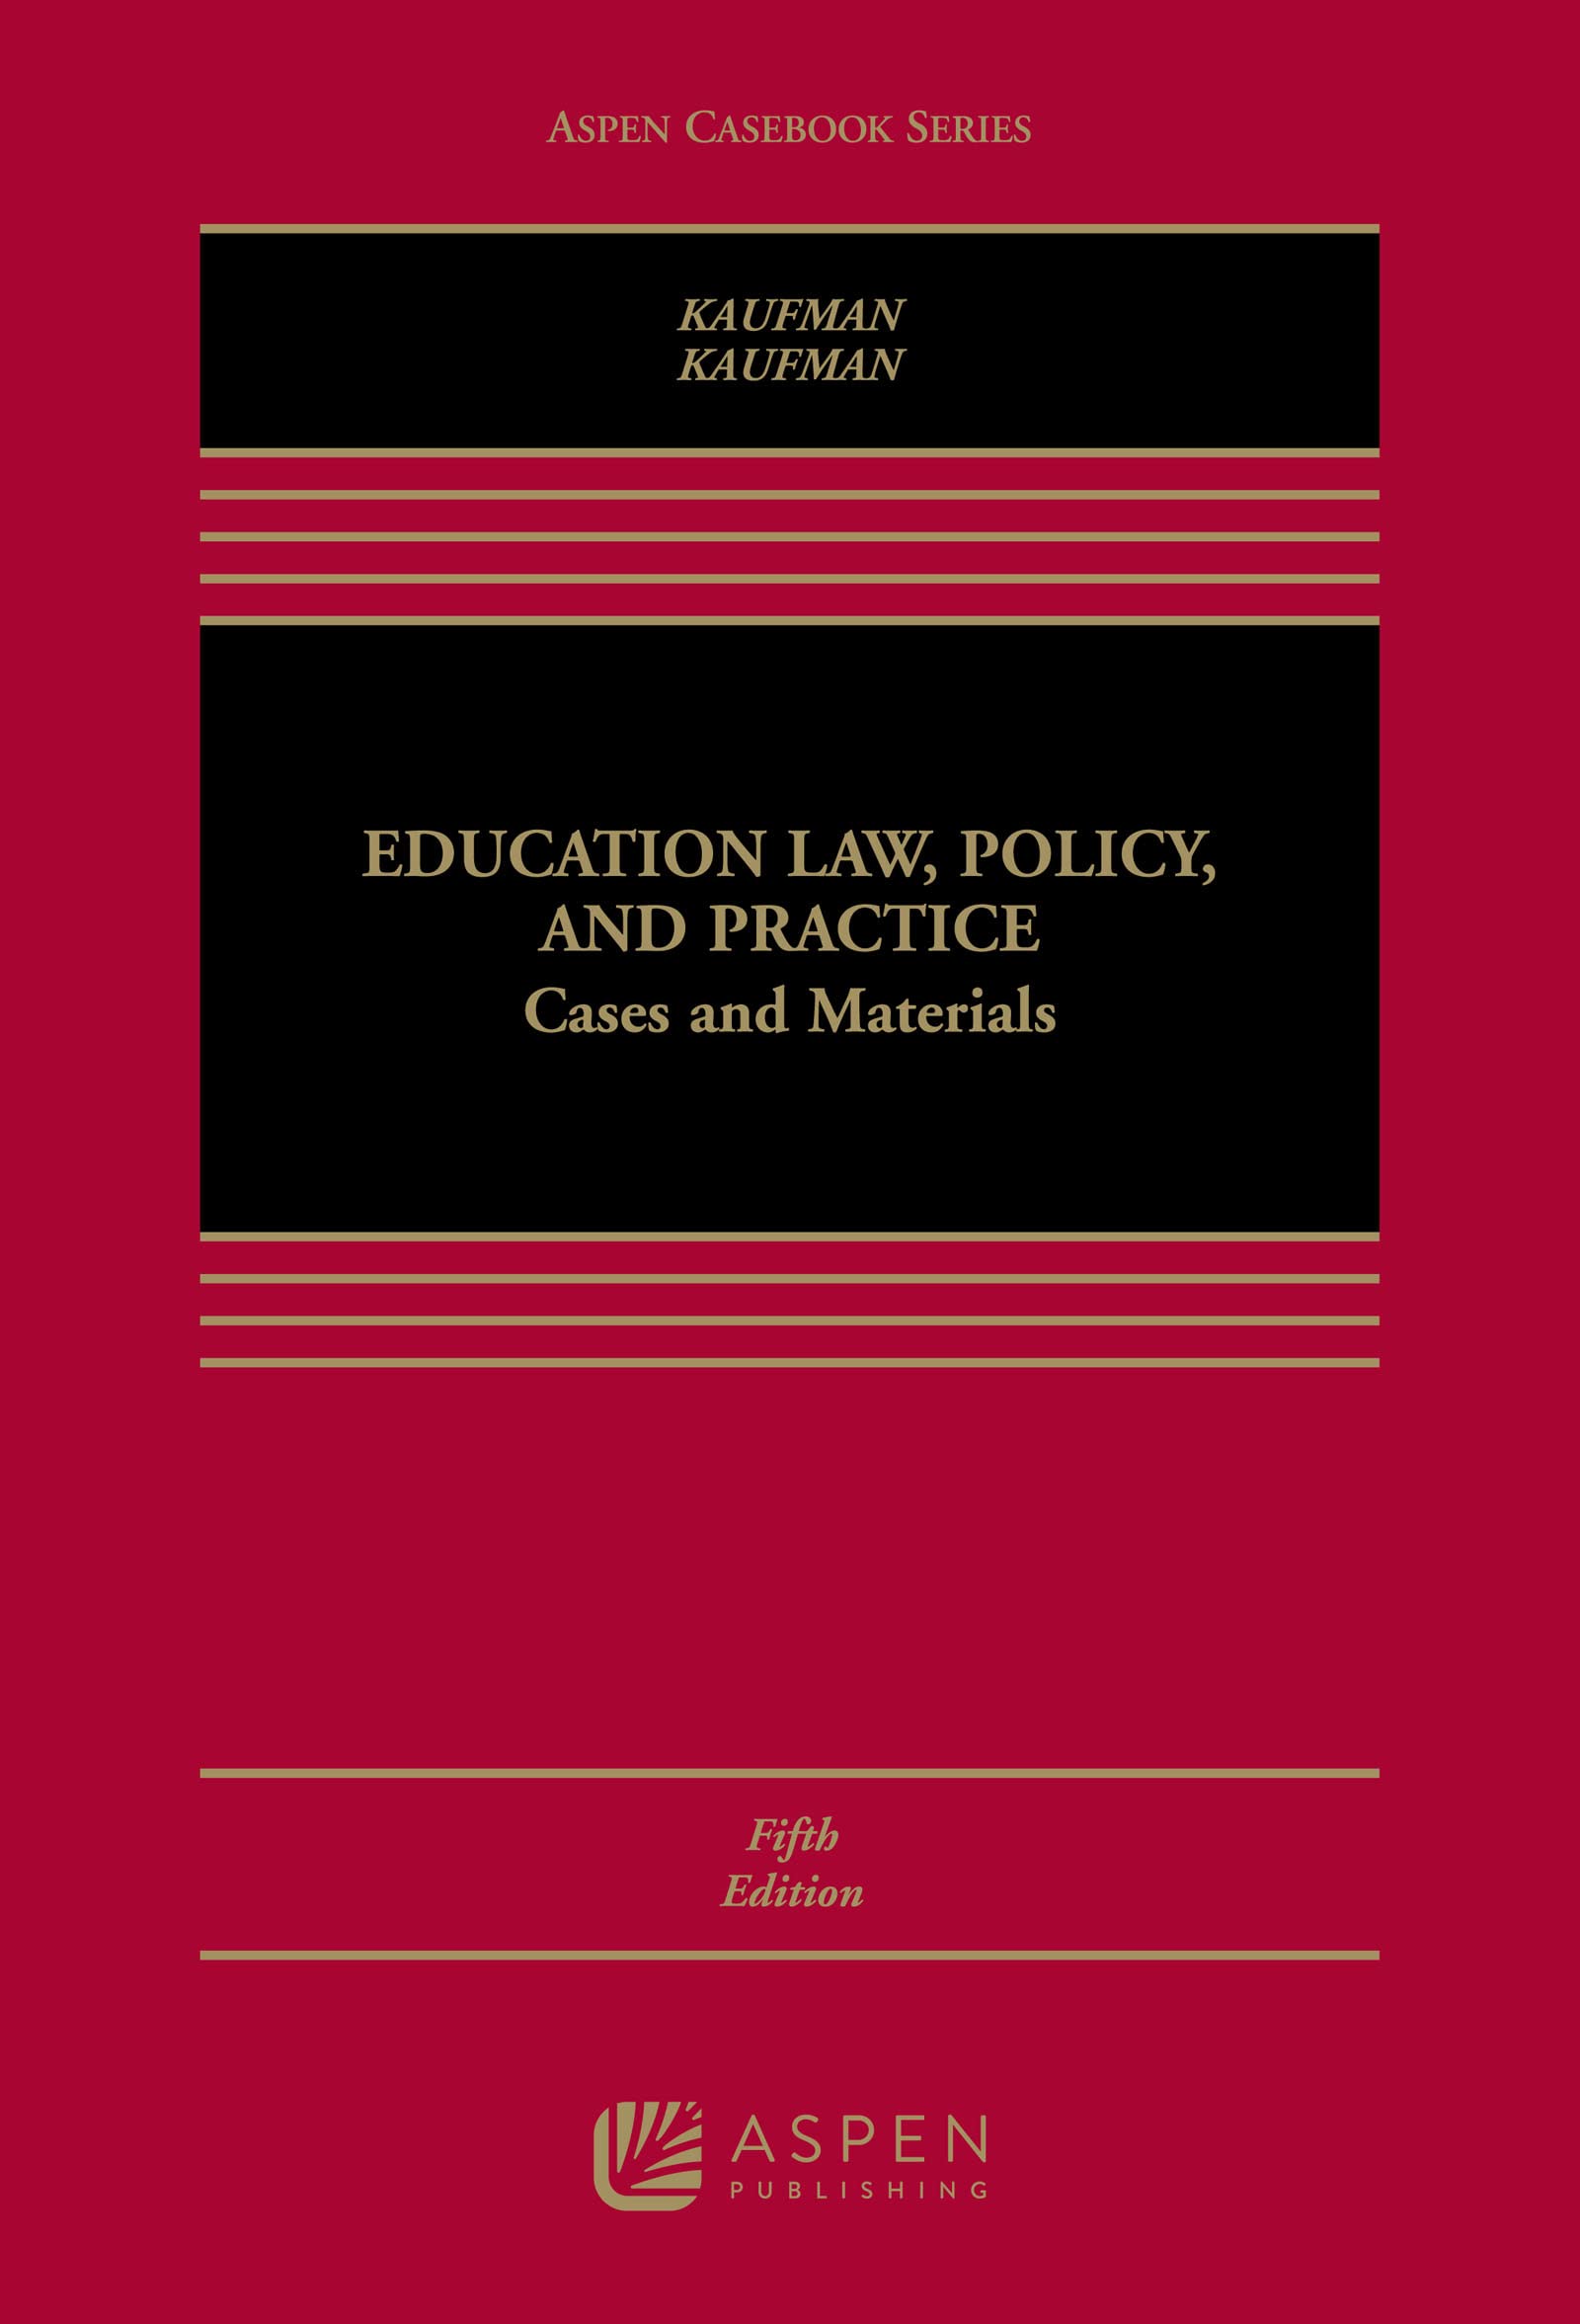 Education Law, Policy, and Practice: Cases and Materials (Aspen Casebook Series)